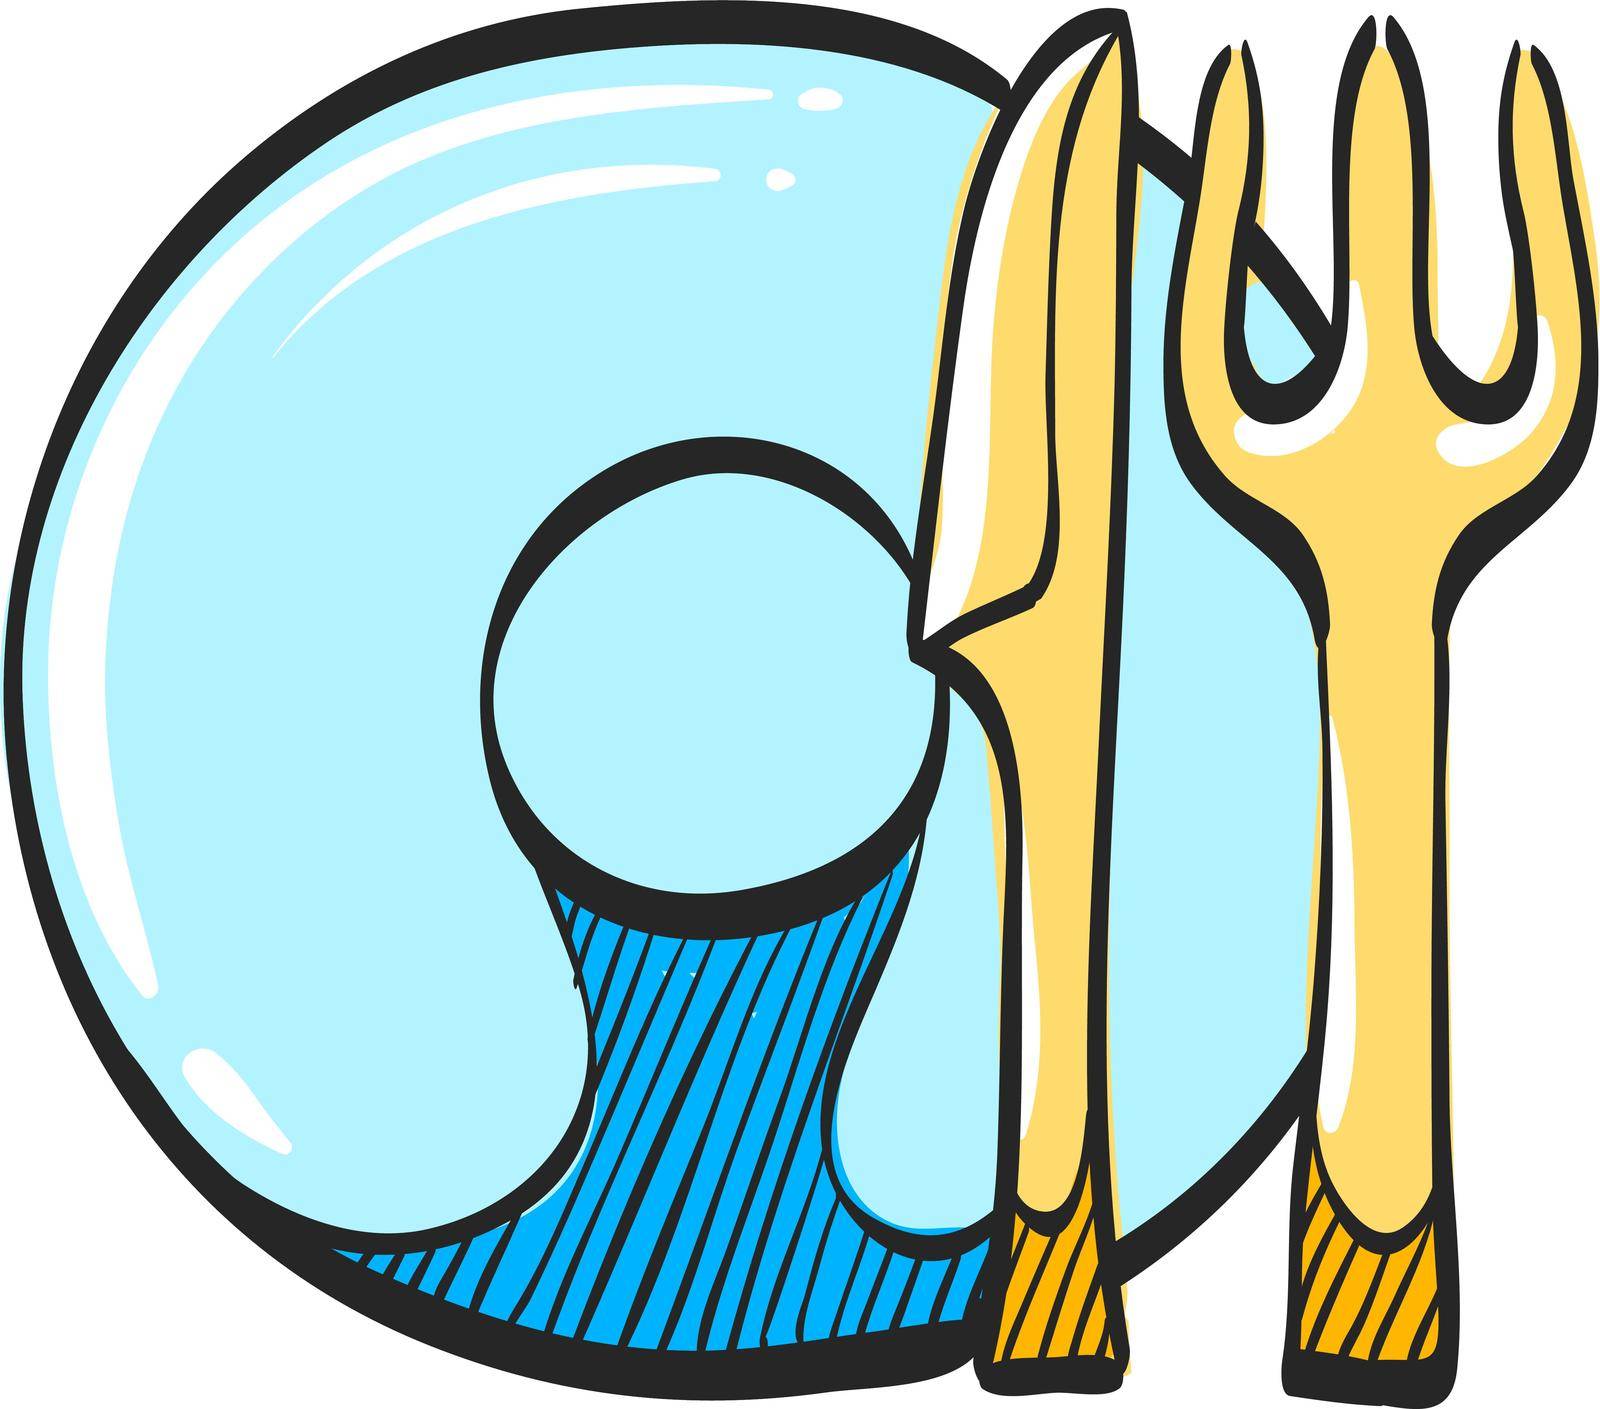 Dishes icon in color drawing. Spoon fork dinner supper breakfast eating